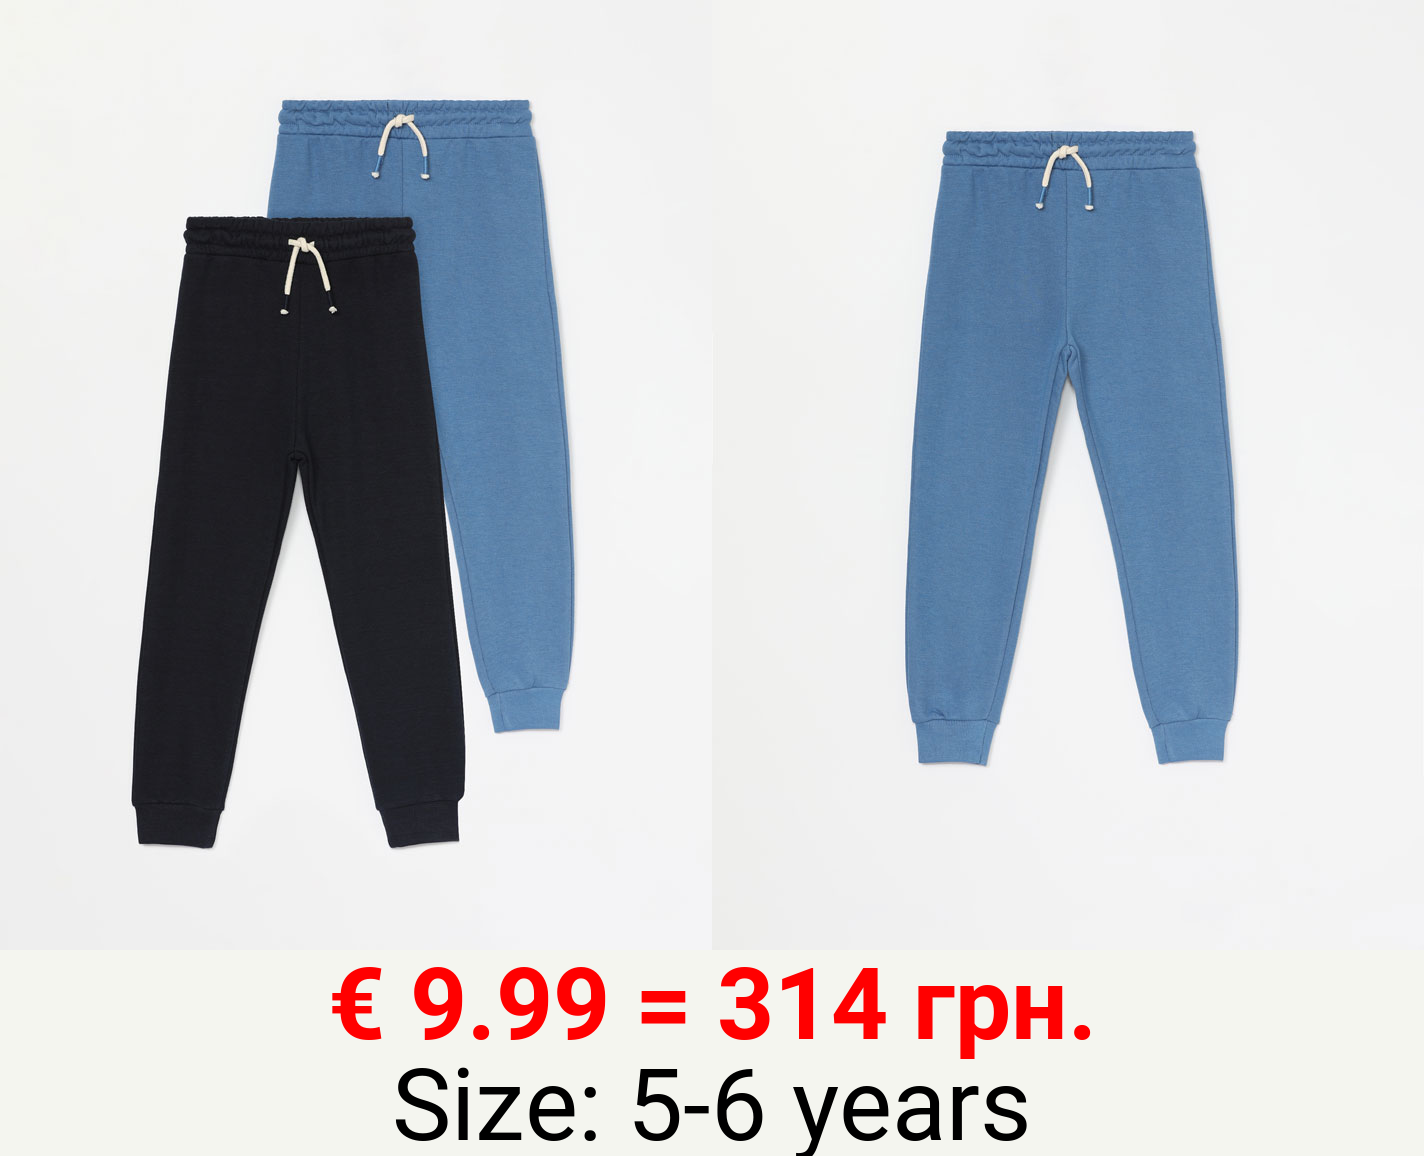 2-Pack of Basic Plush Trousers